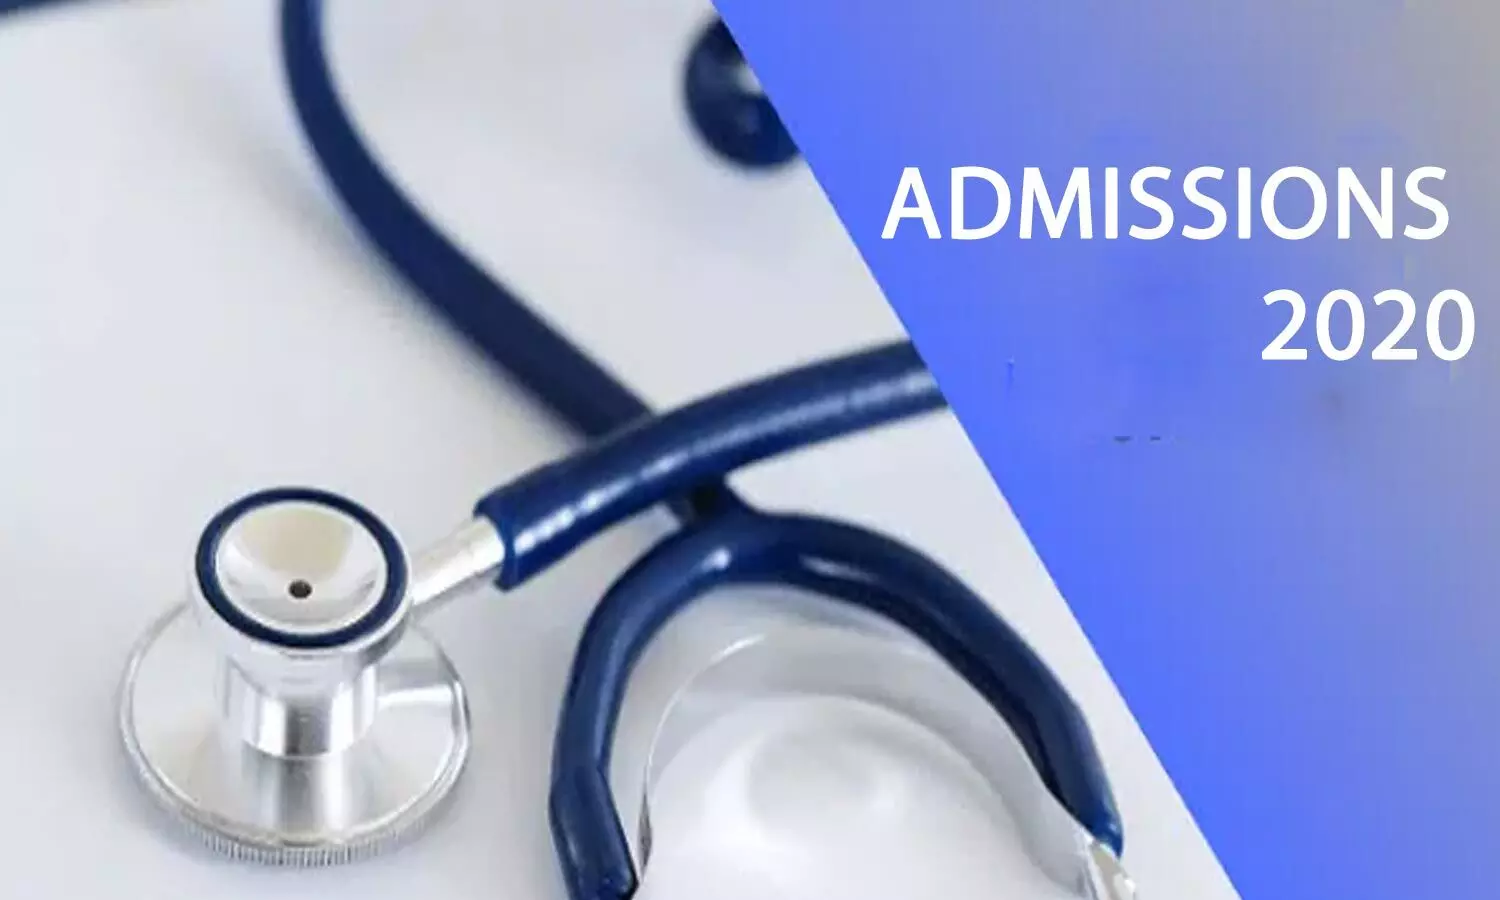 TN Health notifies on requirements for Post Doctoral Fellowship Programme in Minimal Access Surgery, Gynaec-Oncology 2020